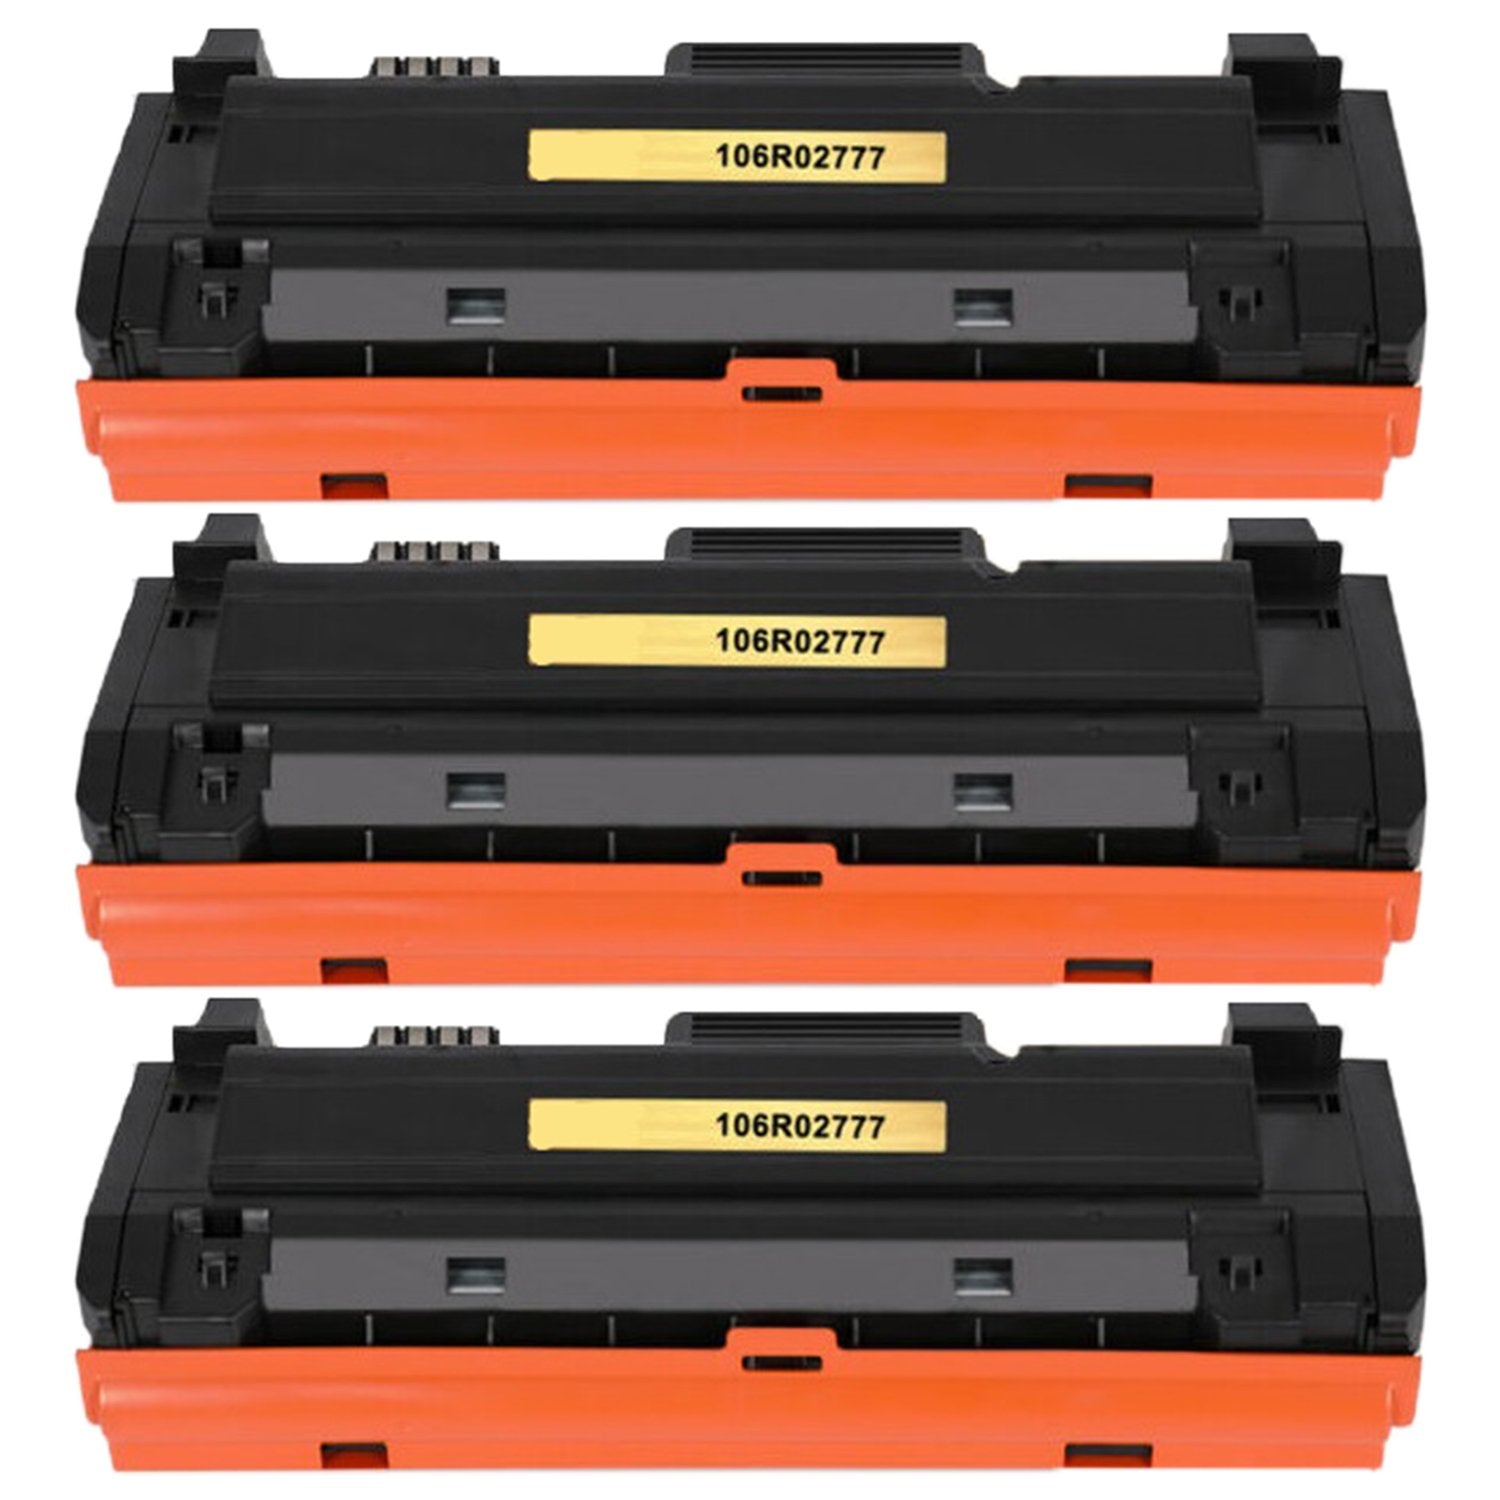 Absolute Toner Compatible Xerox 106R02777 High Yield Black Toner Cartridge | Absolute Toner Xerox Toner Cartridges